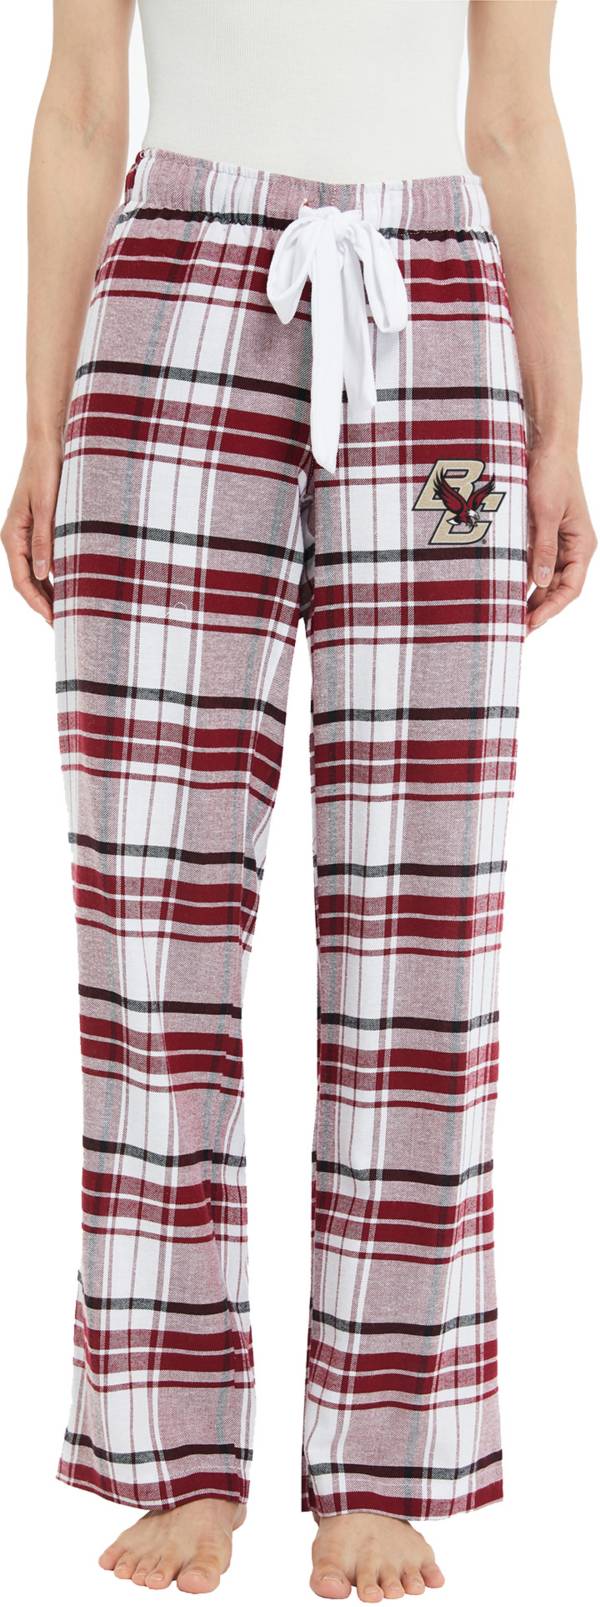 Concepts Sport Women's Boston College Eagles Maroon Accolade Sleep Pants product image